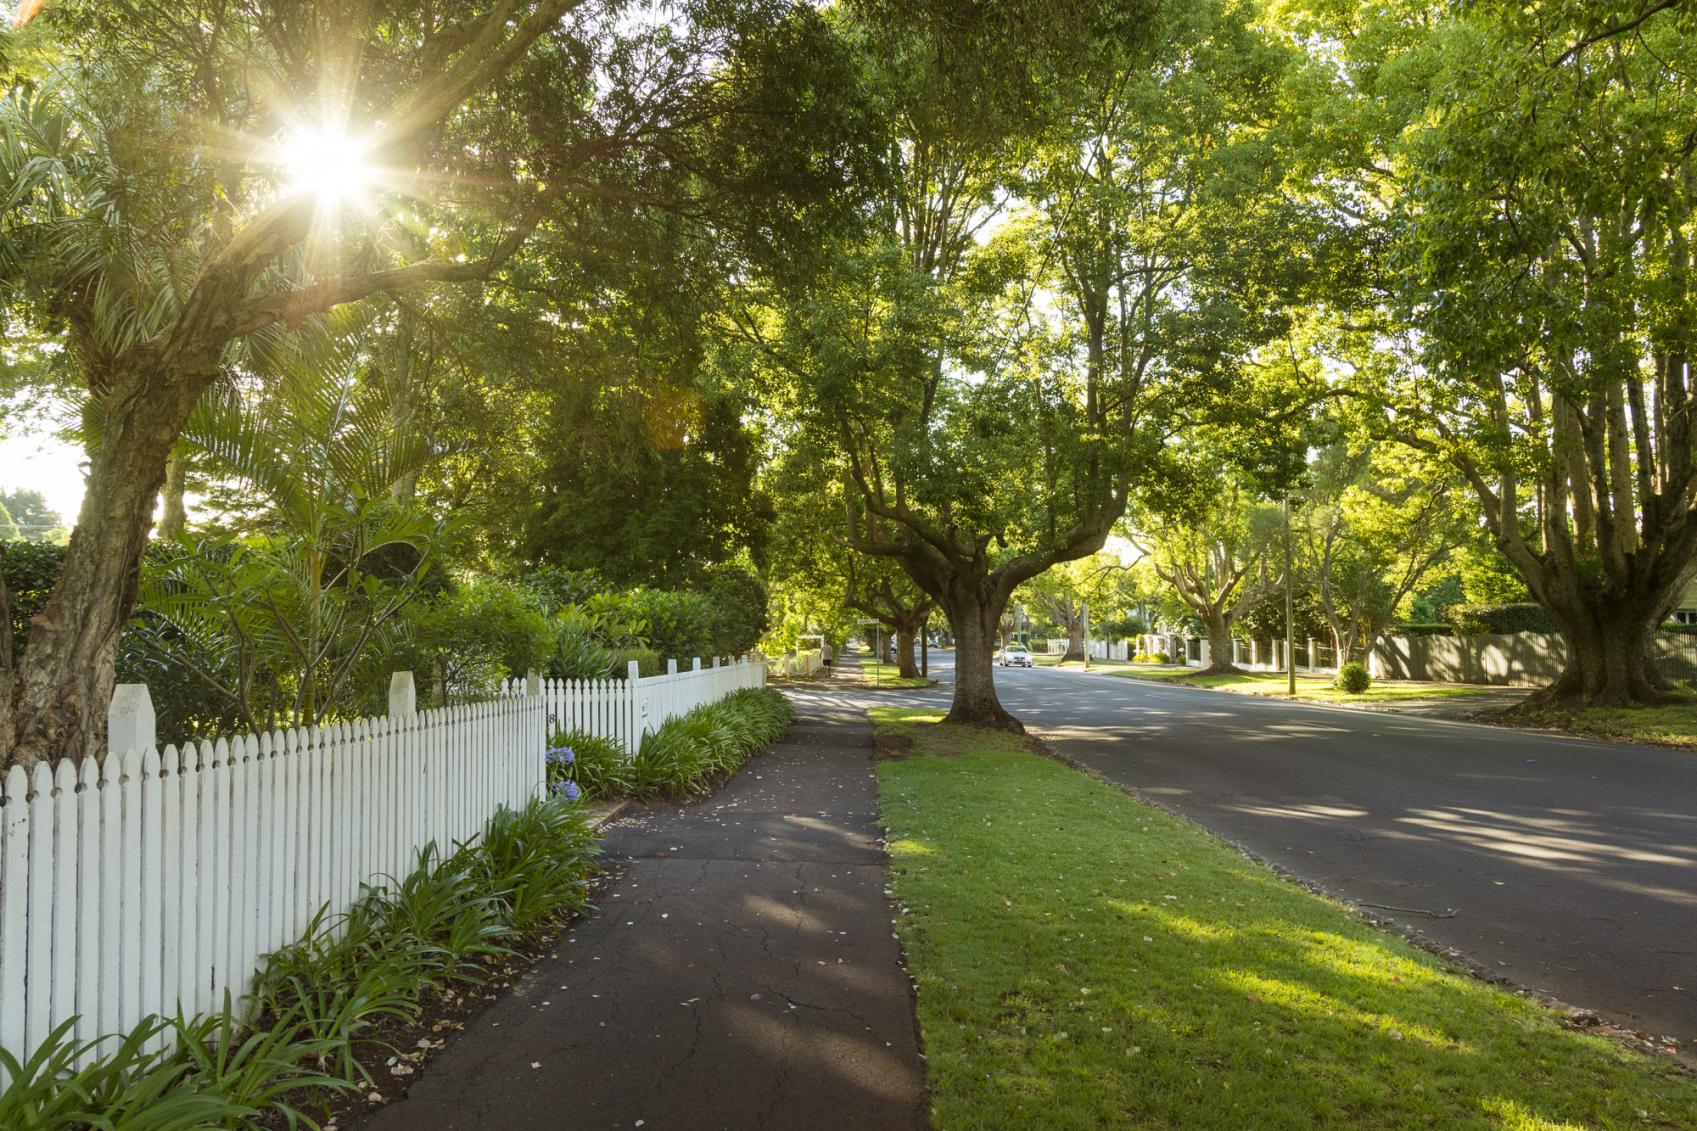 A leafy streetscape with a white picket fence in a suburb of Toowoomba Queensland